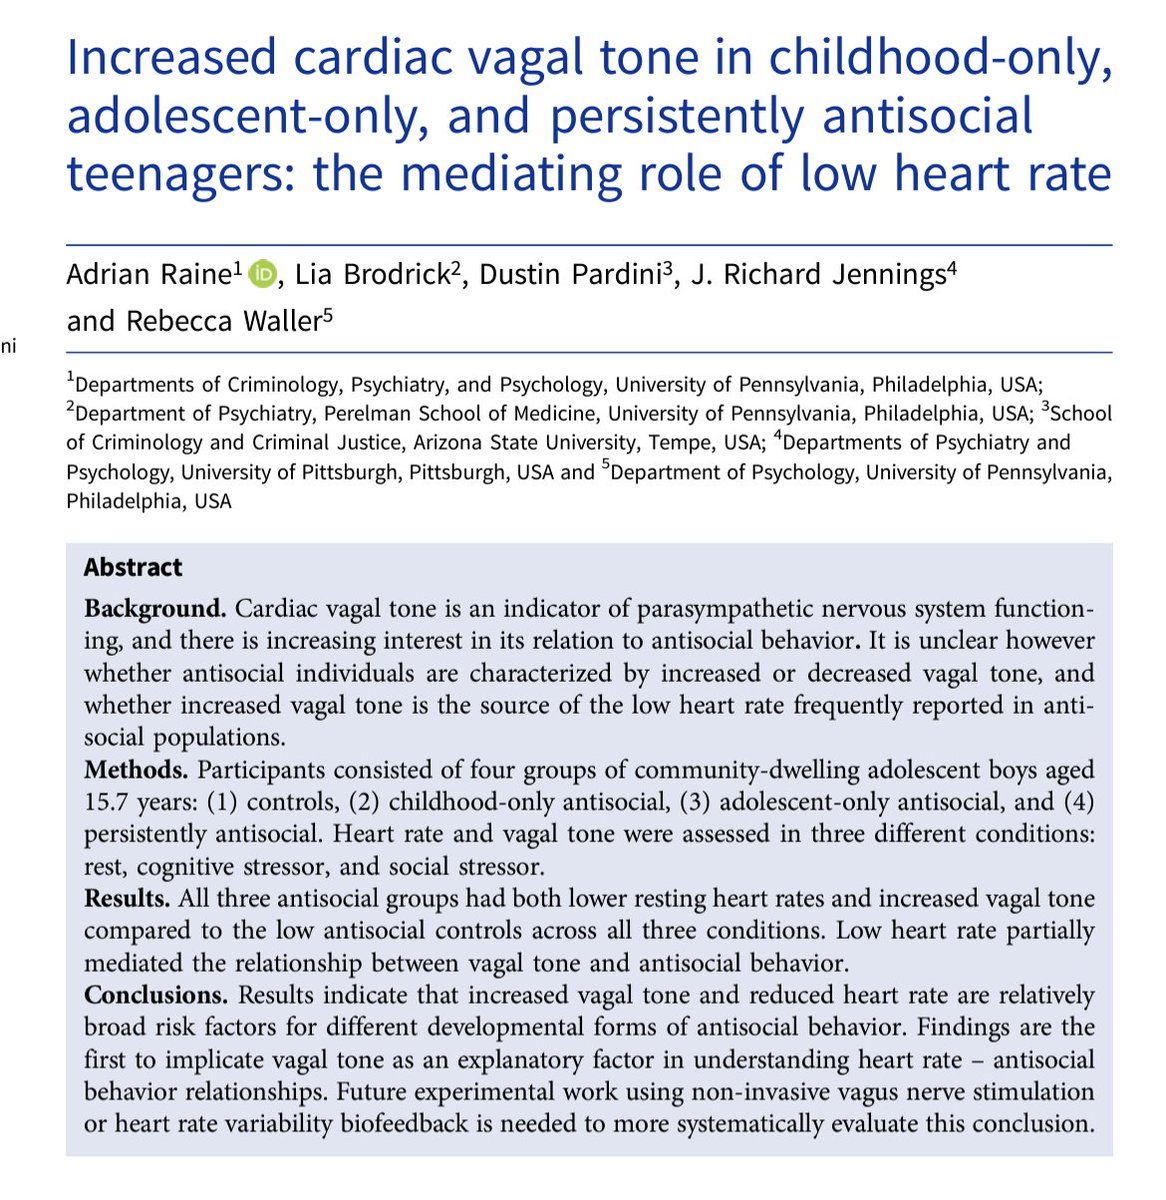 Could simply measures of peripheral physiology provide screening tools for antisocial behavior risk in childhood? In four groups of adolescents, low resting heart rate and increased vagal tone are correlated with risk of antisocial behavior.